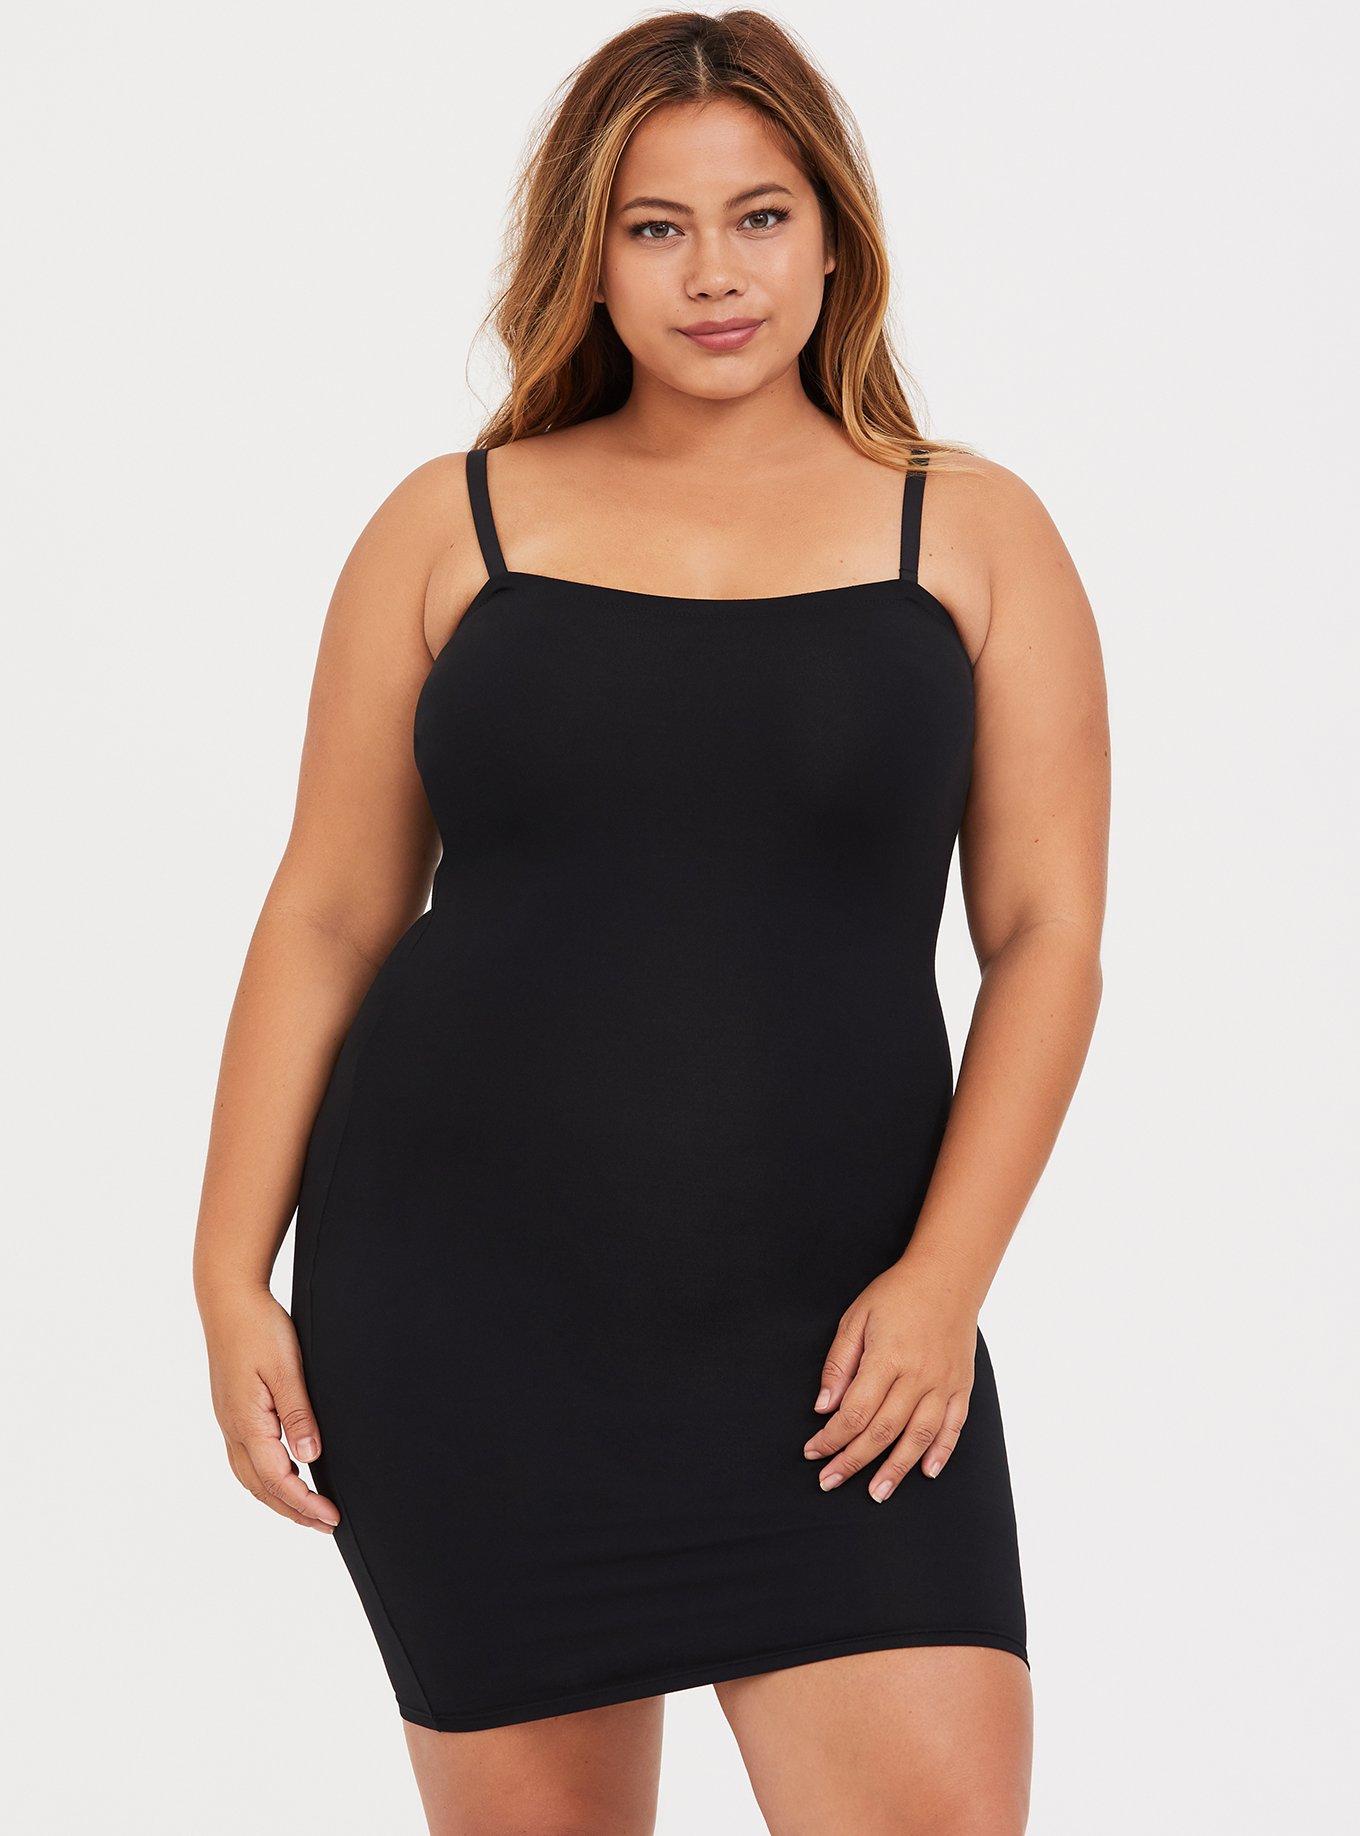 SPANX 989 Black XL Slimplicity Convertible Strapless Slip with